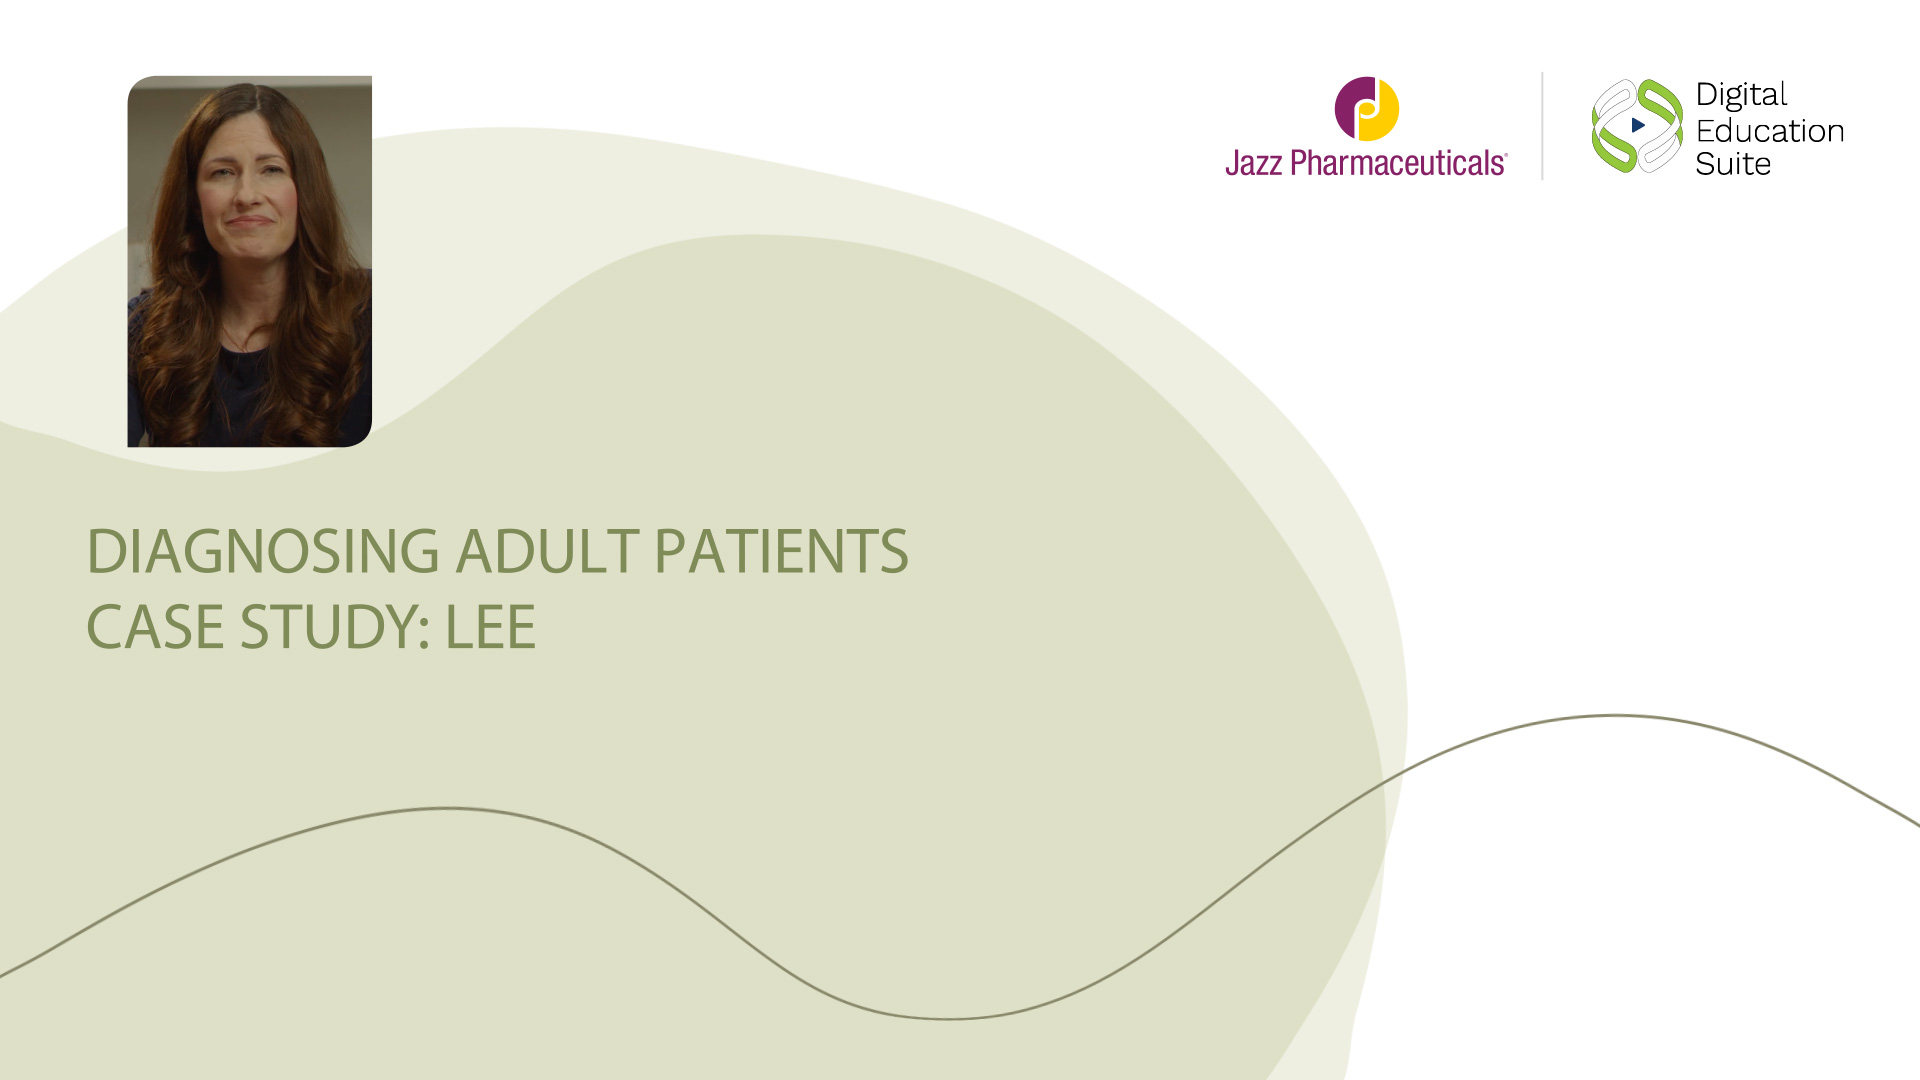 A case study of a hypothetical patient with LGS who has been transferred to your care.